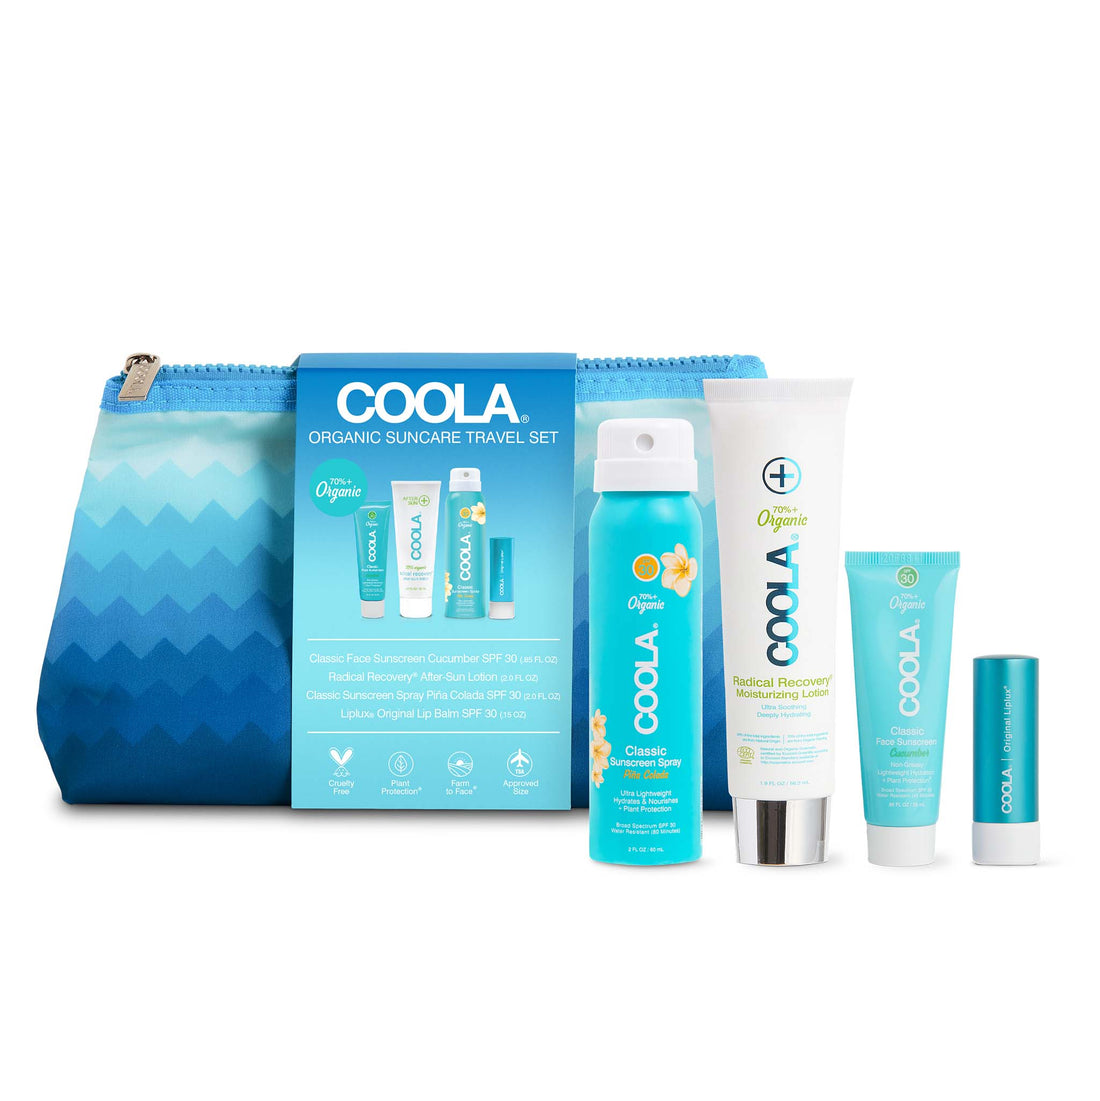 Coola Travel Kit has a travel size body spray, face spf, after sun lotion and an spf lip gloss. 